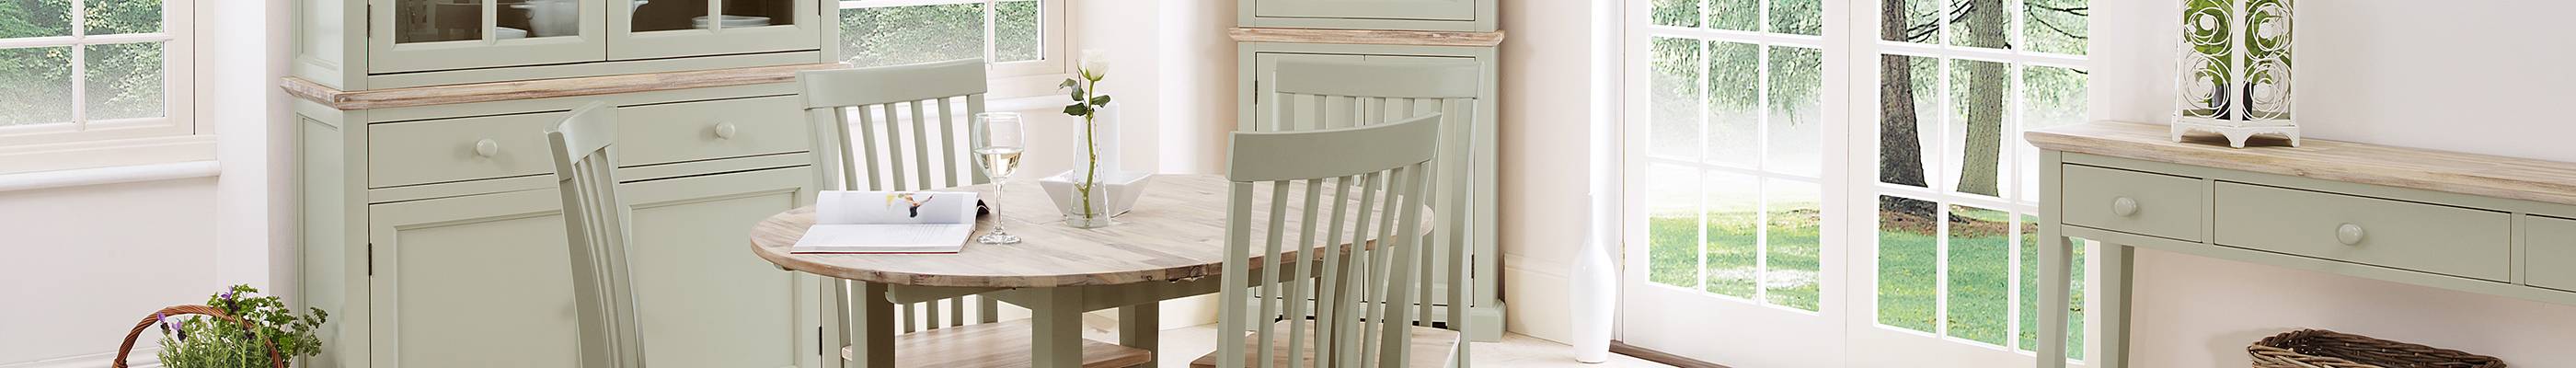 country style chair sage green